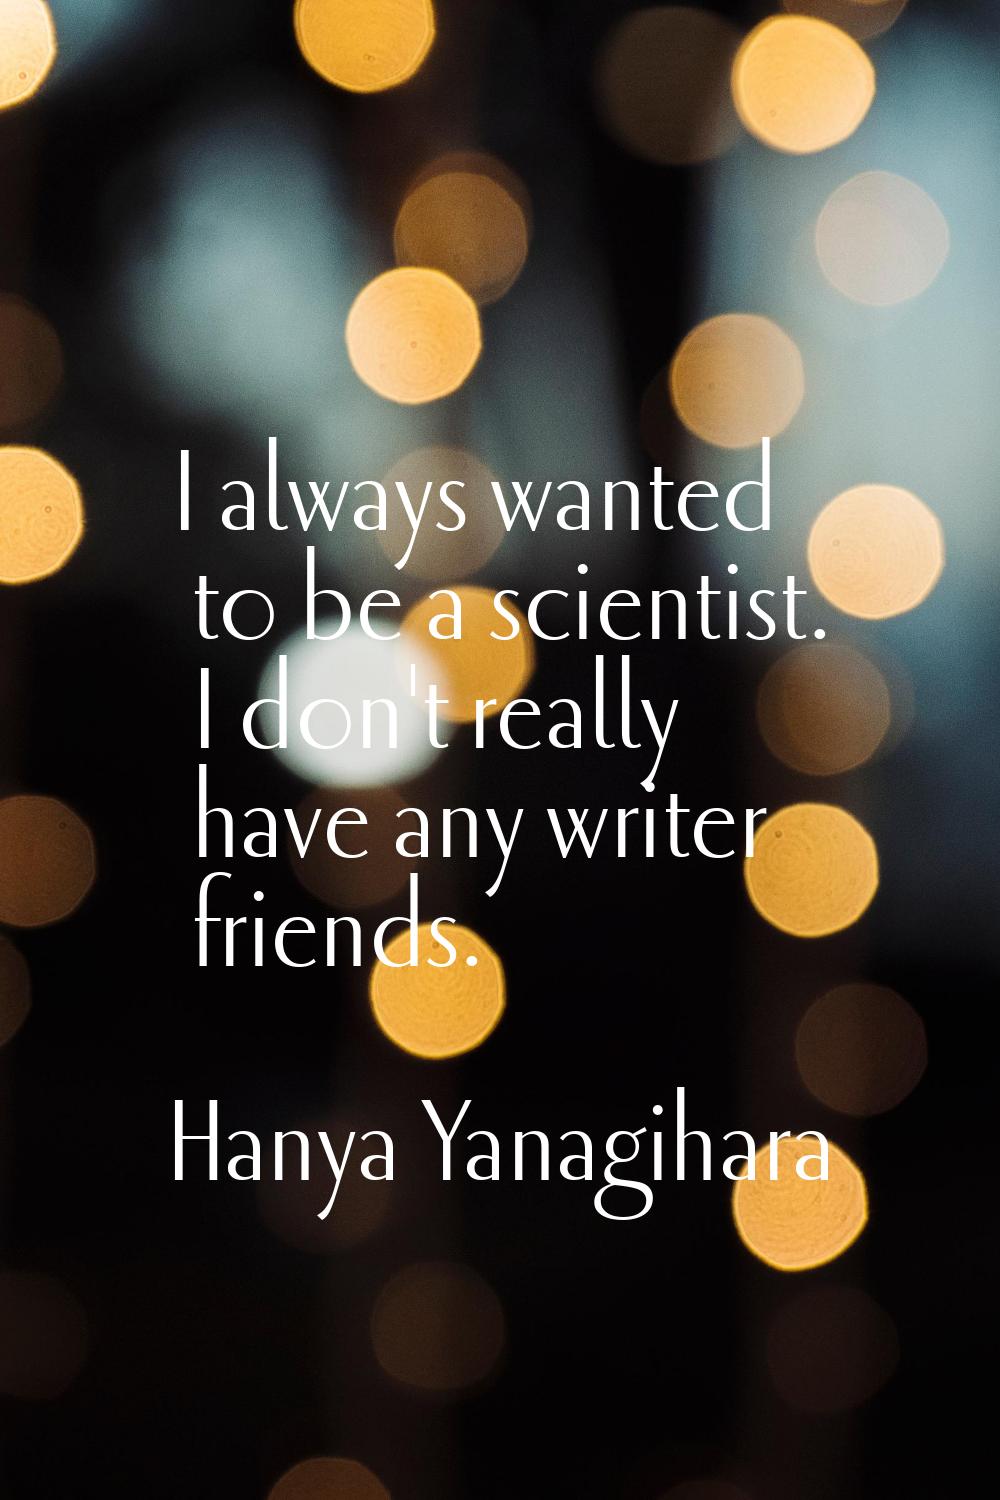 I always wanted to be a scientist. I don't really have any writer friends.